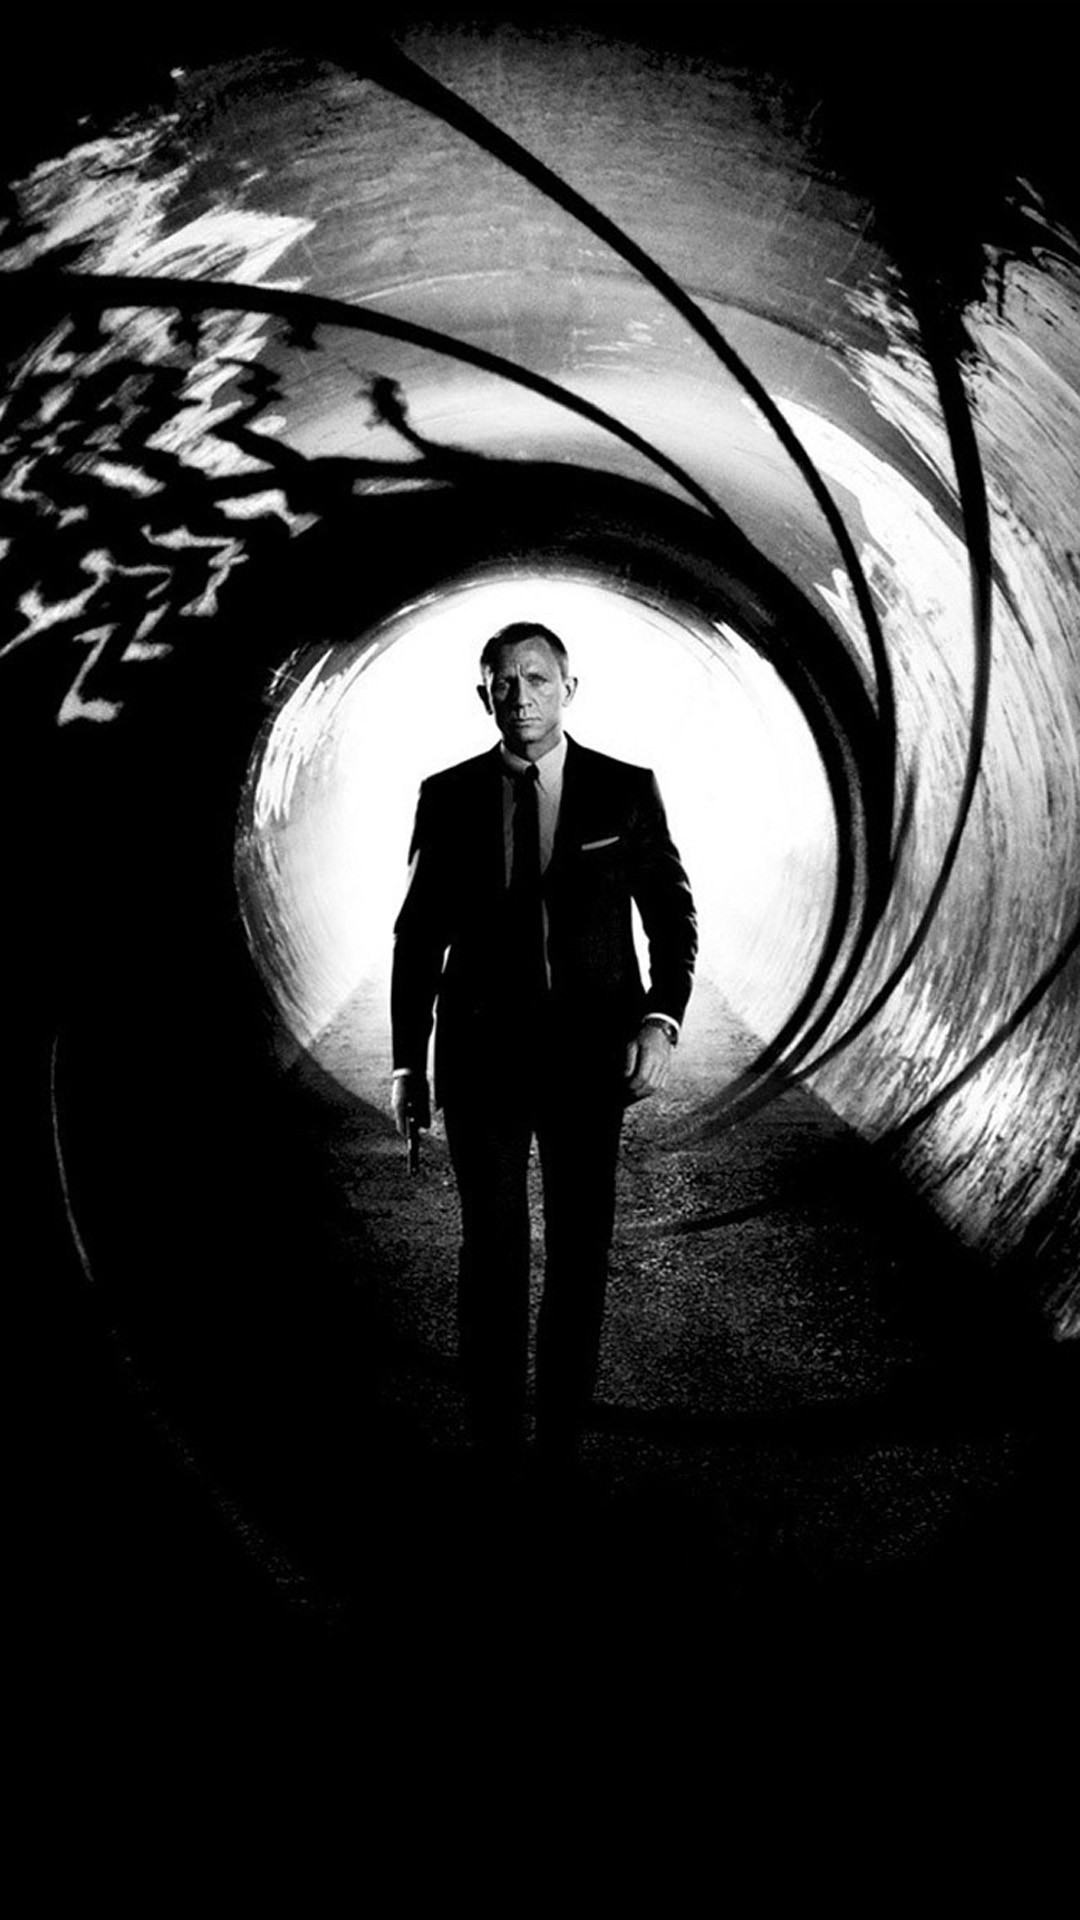 007 iphone wallpaper,photograph,black and white,monochrome photography,darkness,monochrome